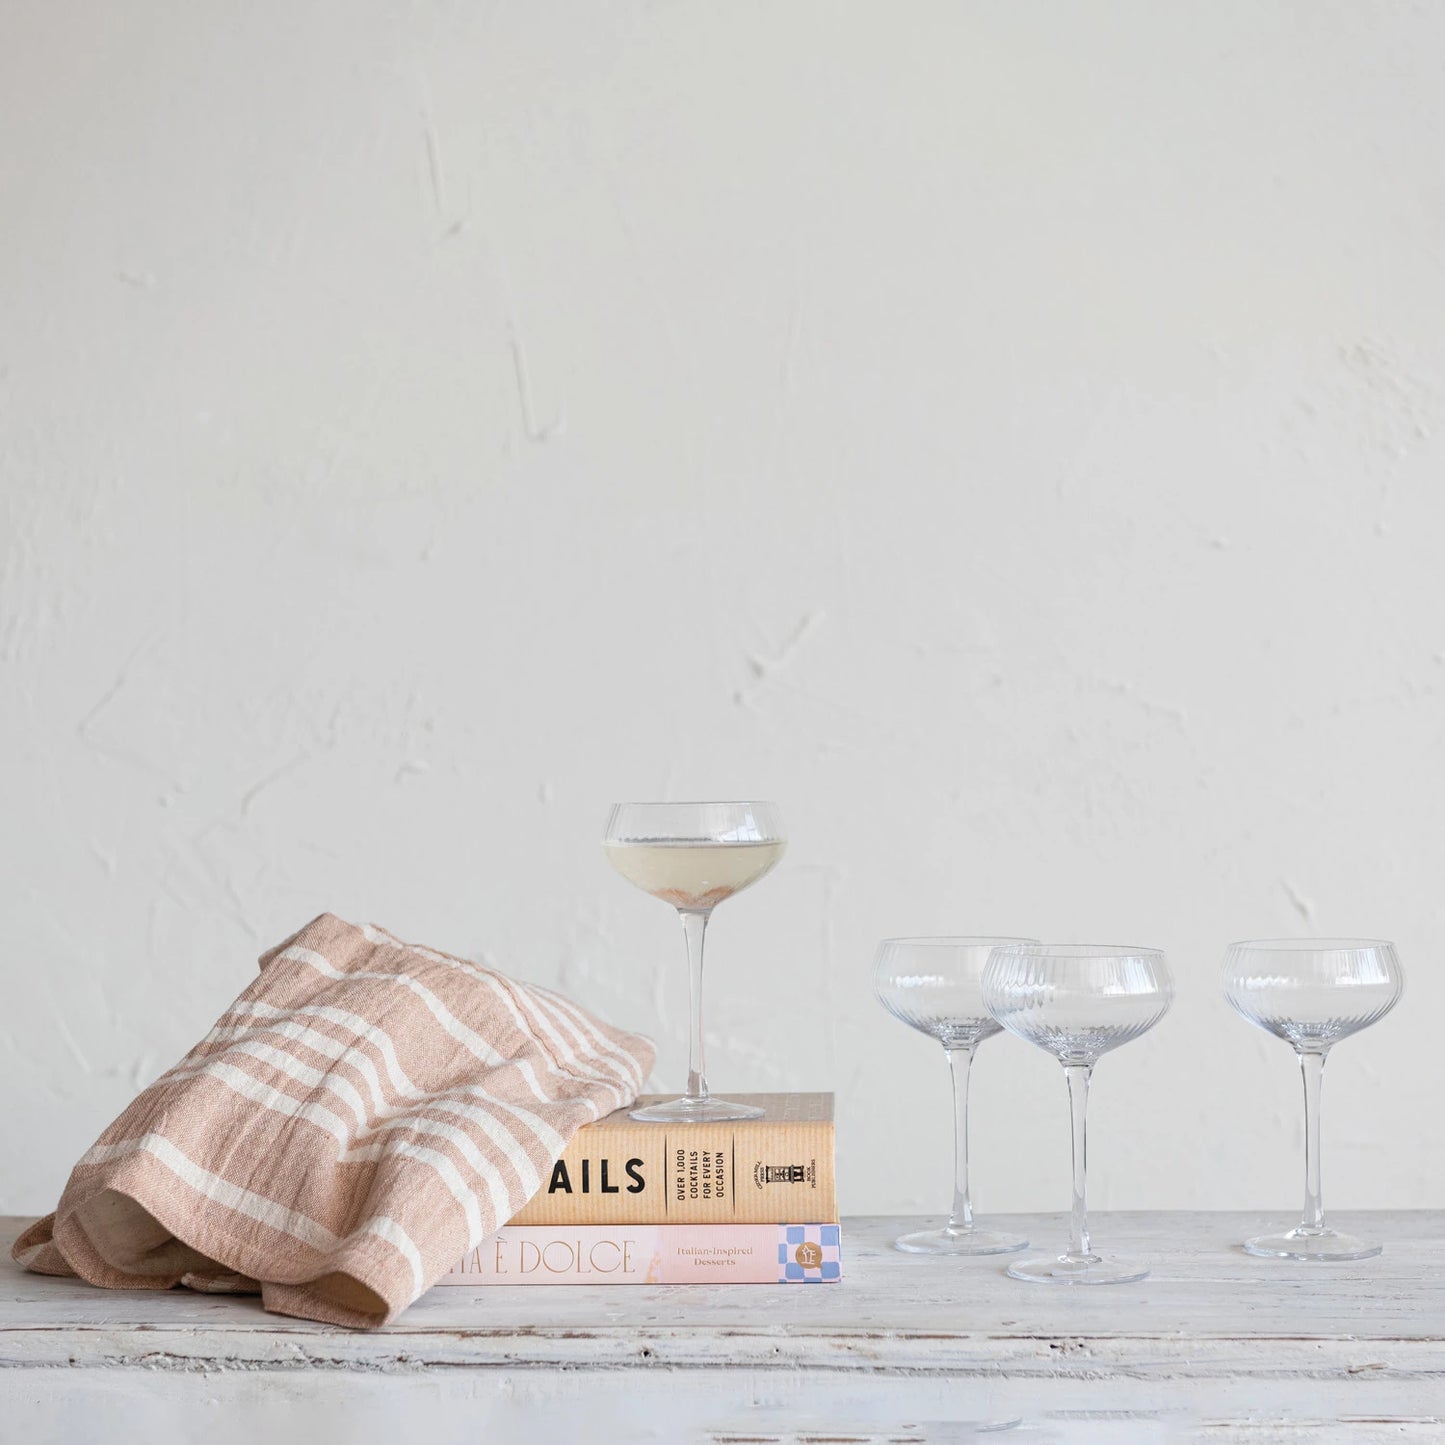 4 coupe glasses arranged on a wooden table with books and a tea towel.